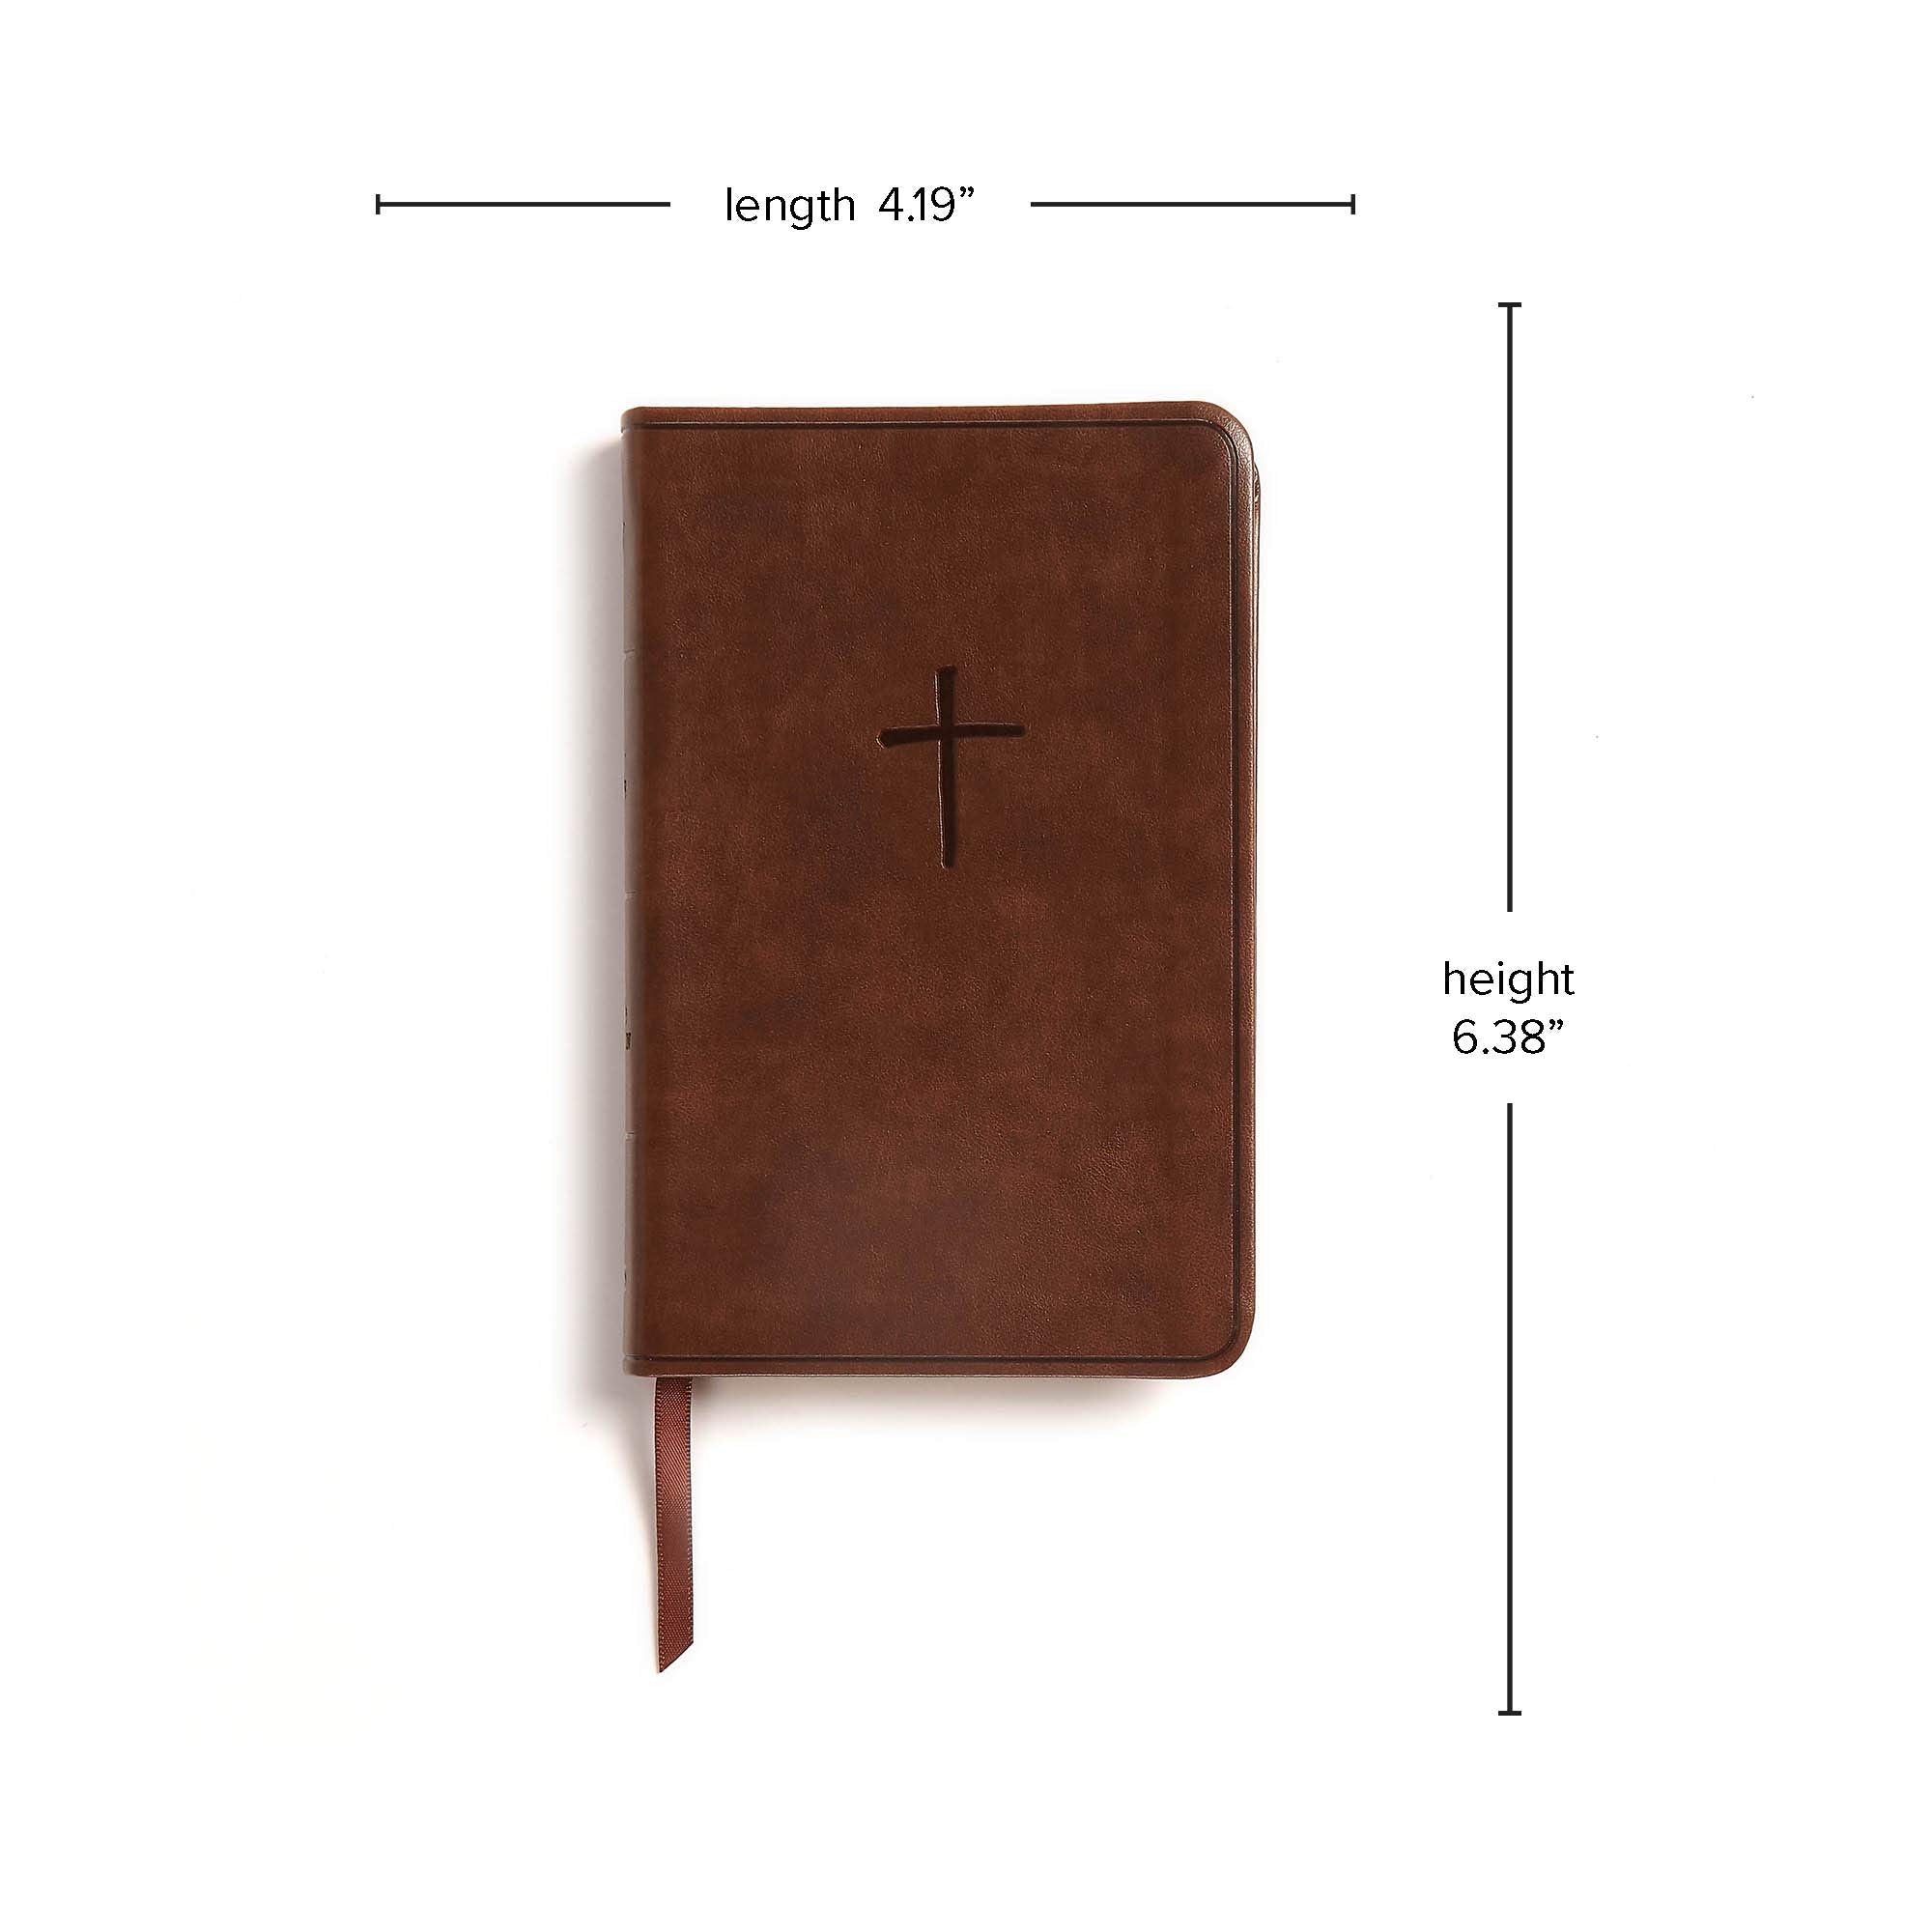 KJV Compact Bible, Brown LeatherTouch, Value Edition